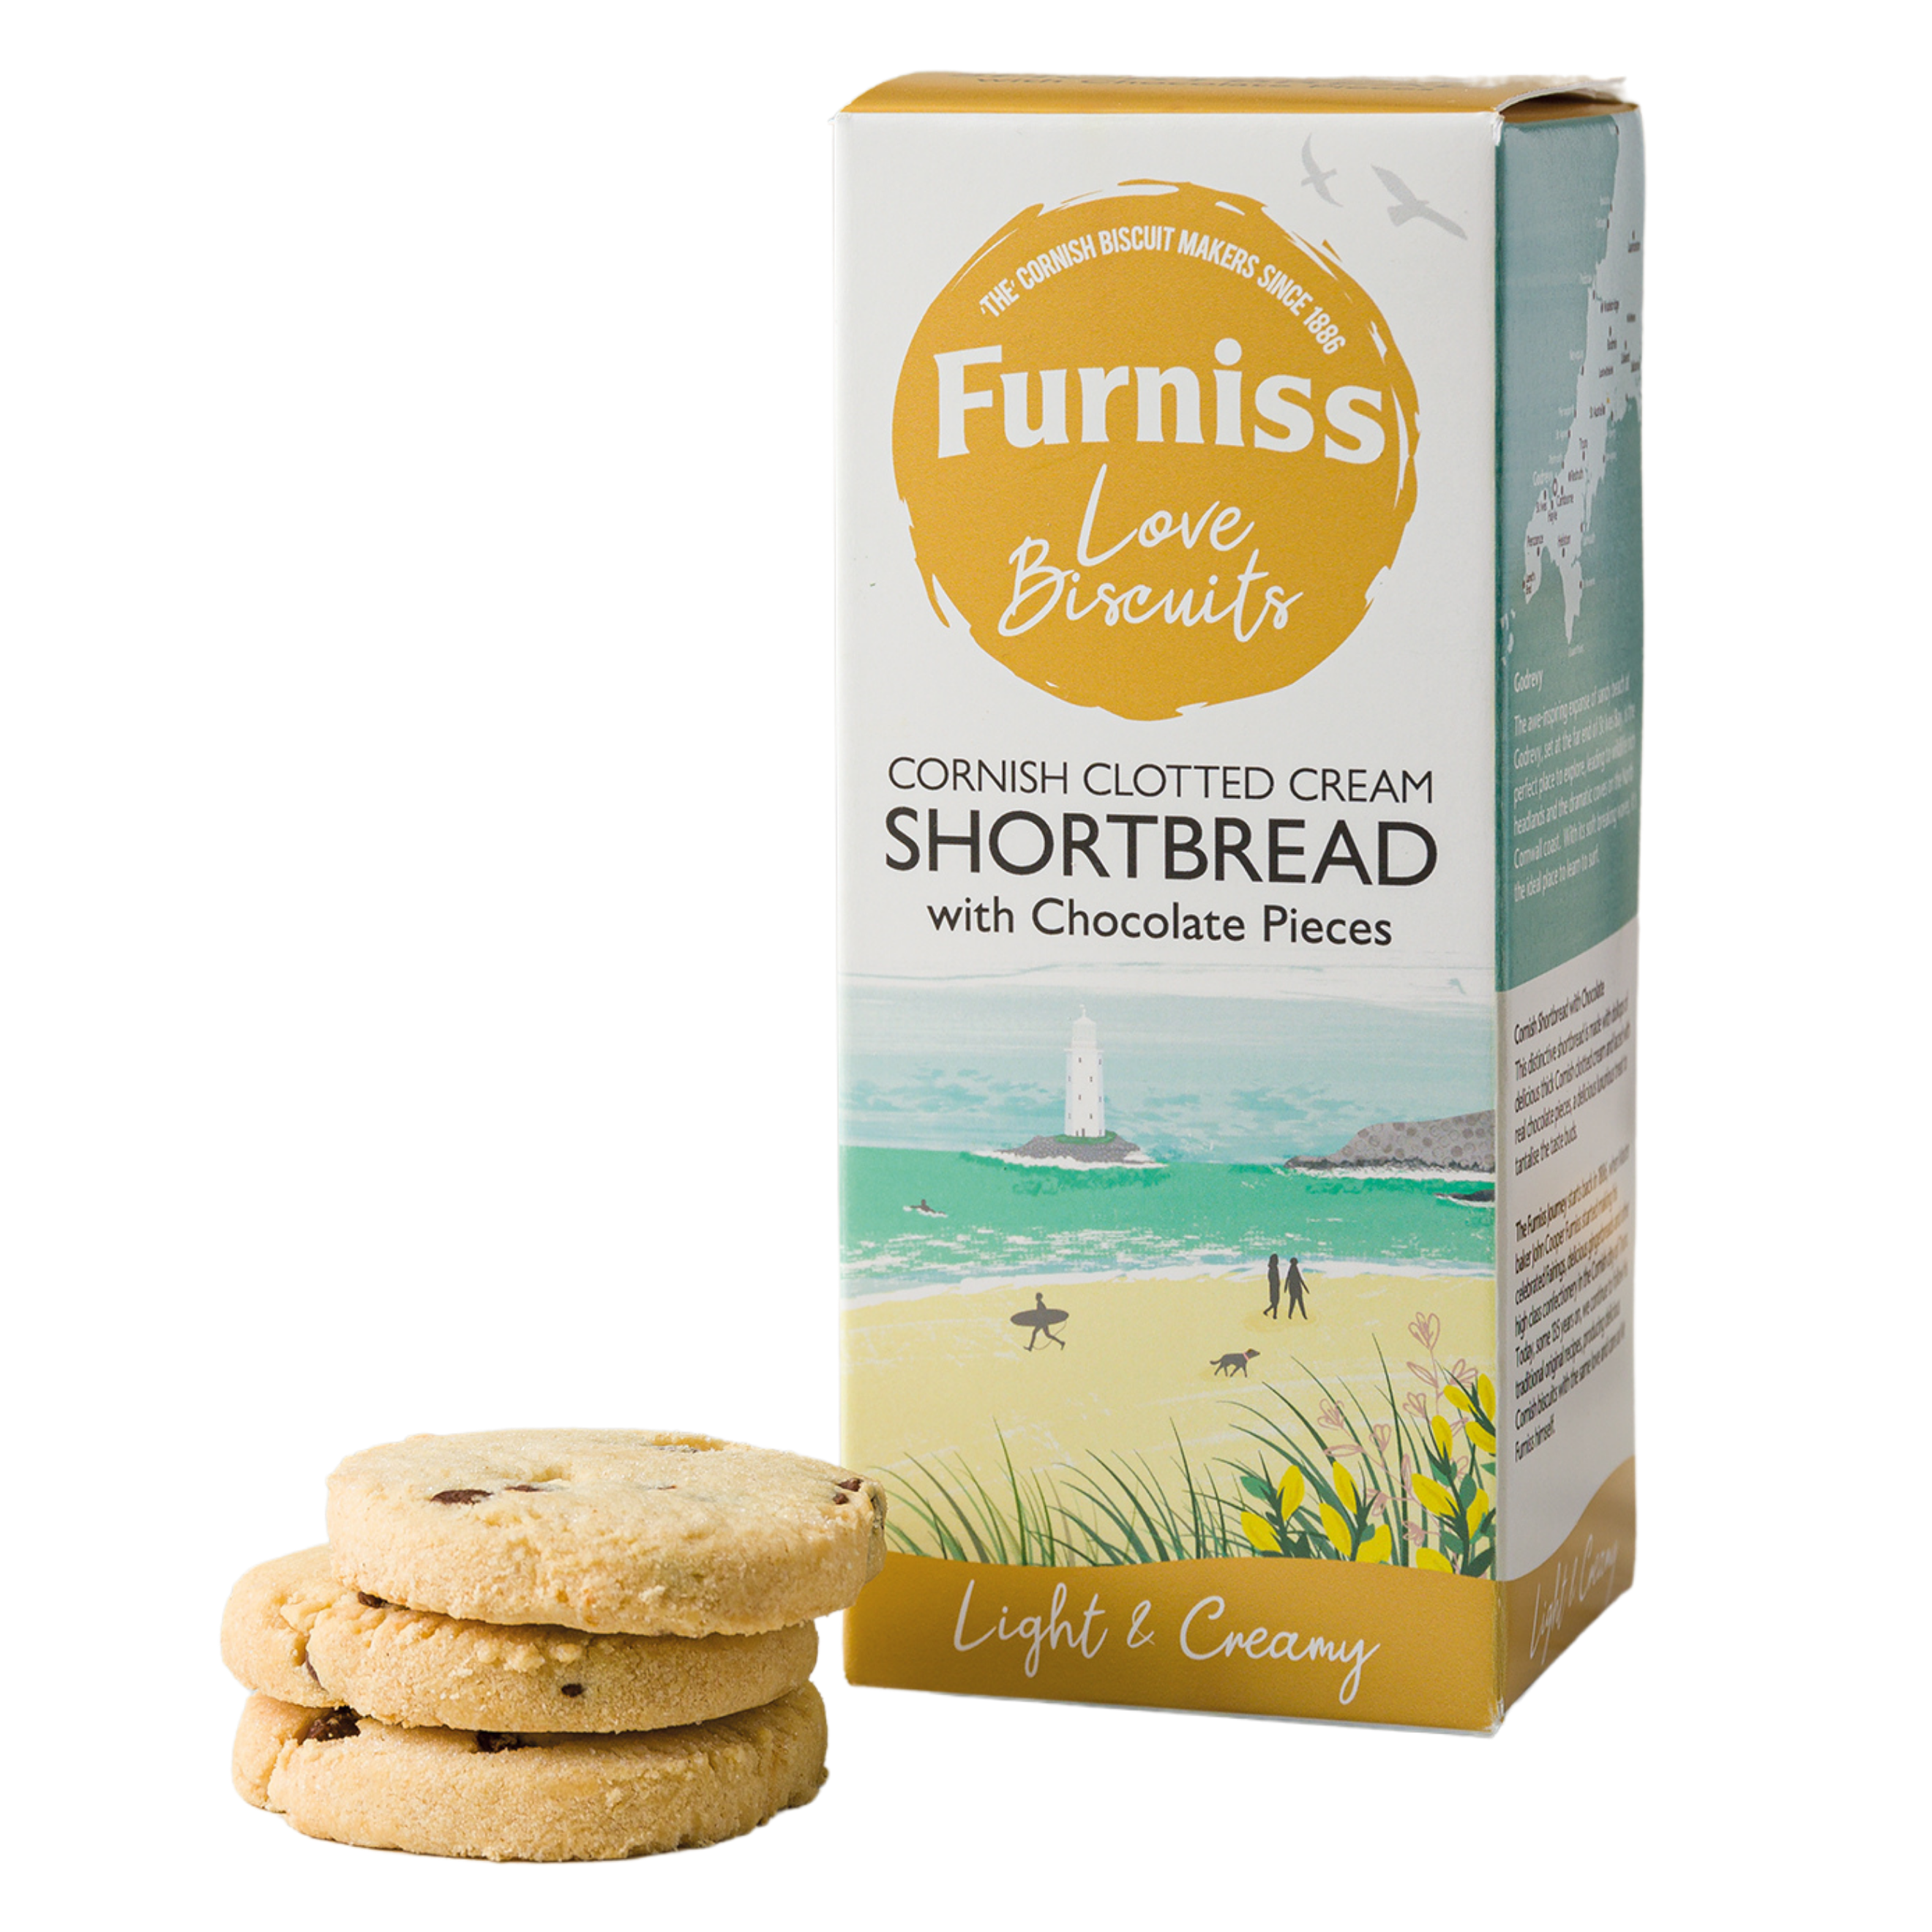 Furniss 200g Shortbread with Chocolate Pieces